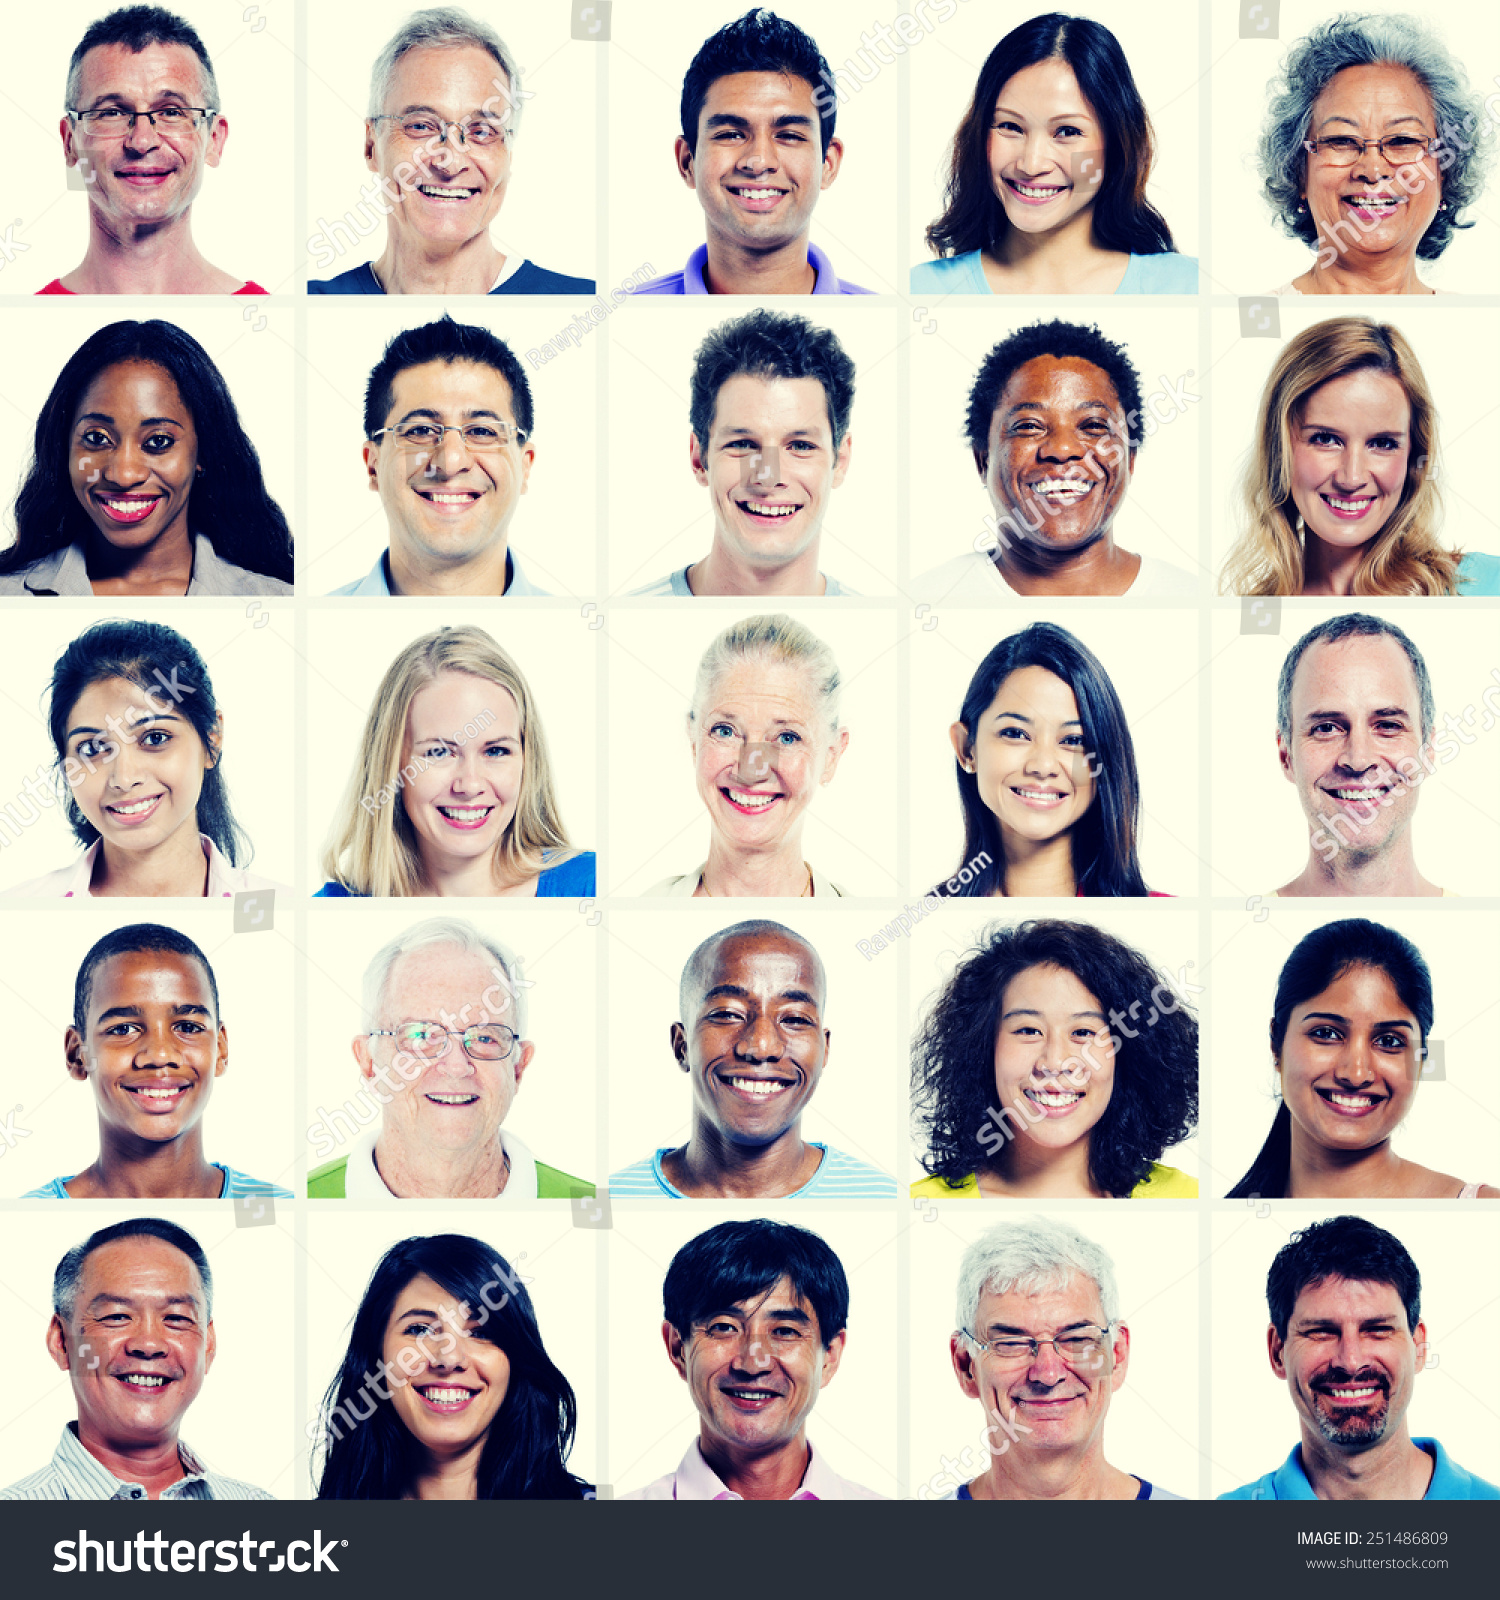 Protrait of Group Diversity People Community Happiness Concept #251486809